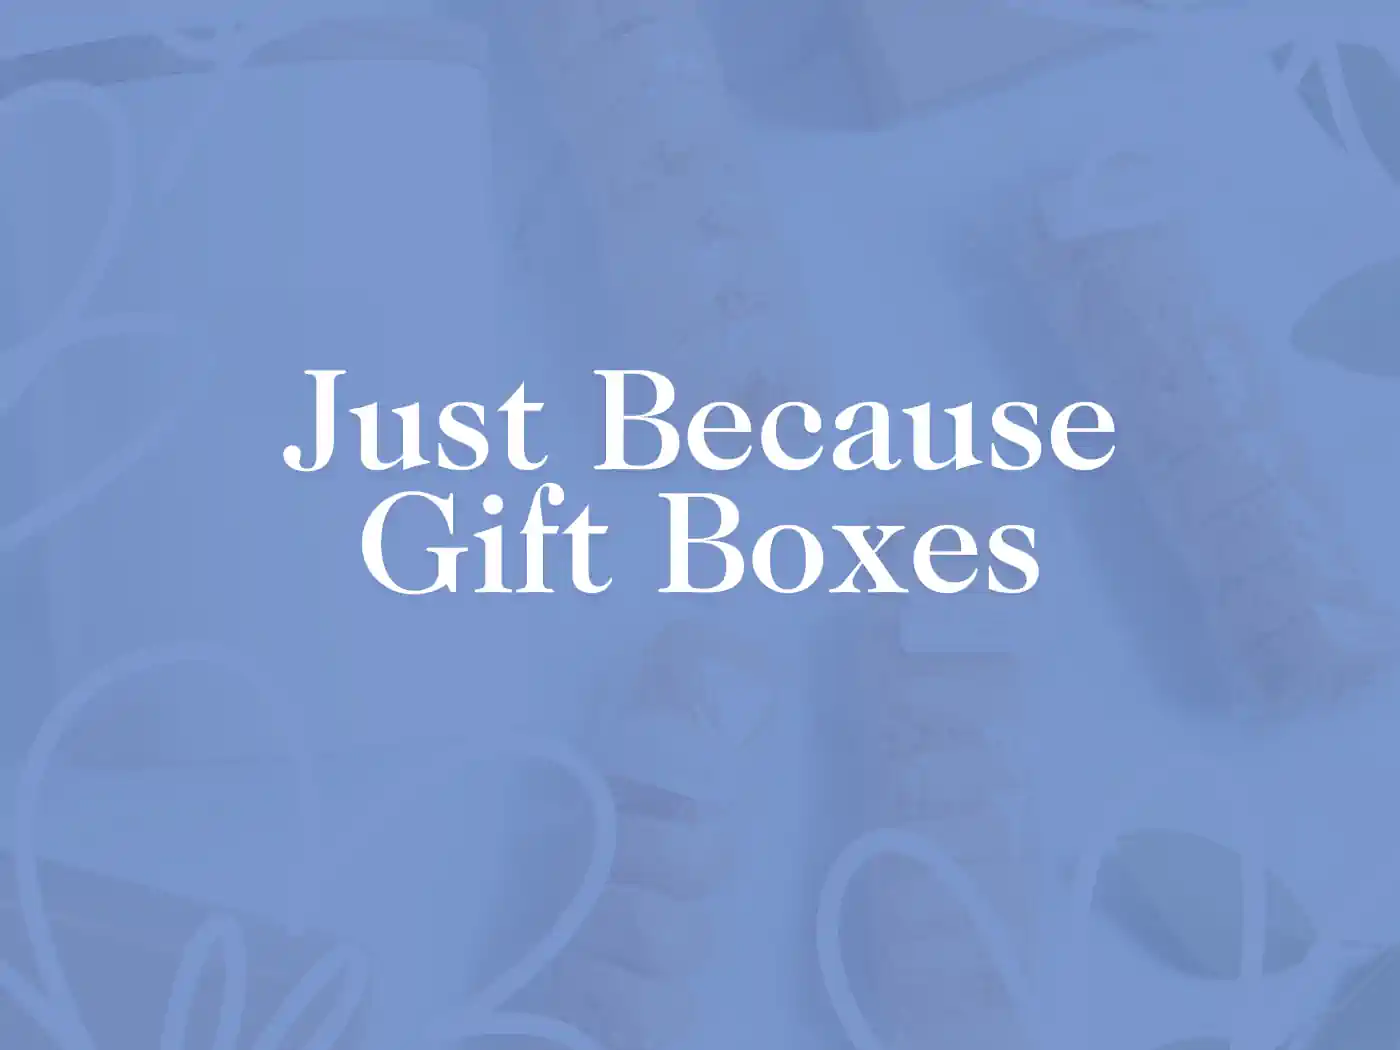 Promotional graphic for Just Because Gift Boxes, featuring elegant white text on a soft blue background with subtle images of gift ribbons. Delivered with Heart. Fabulous Flowers and Gifts.